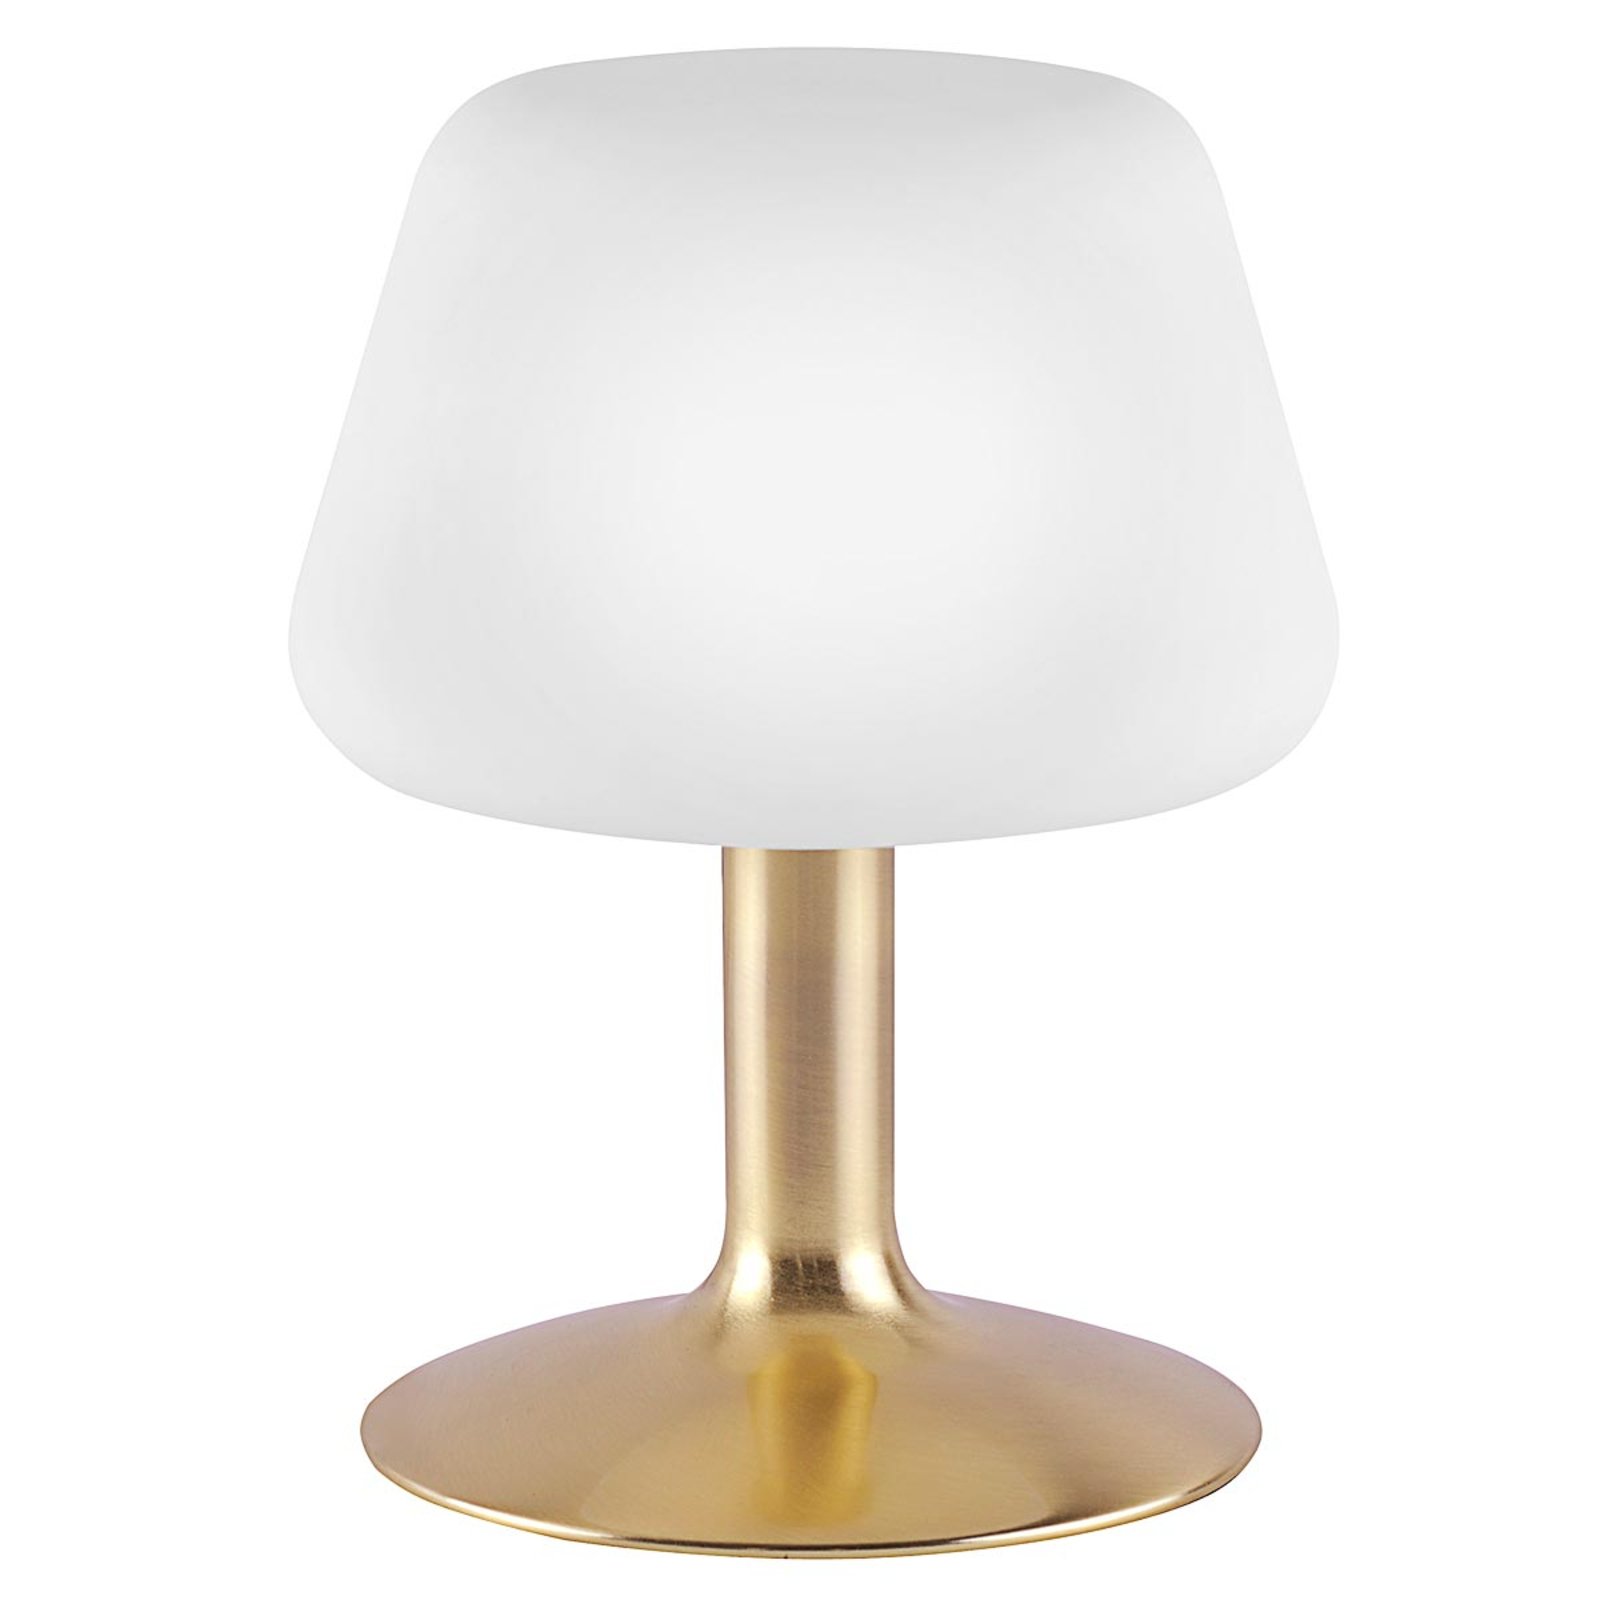 Till - small LED table lamp with brass base